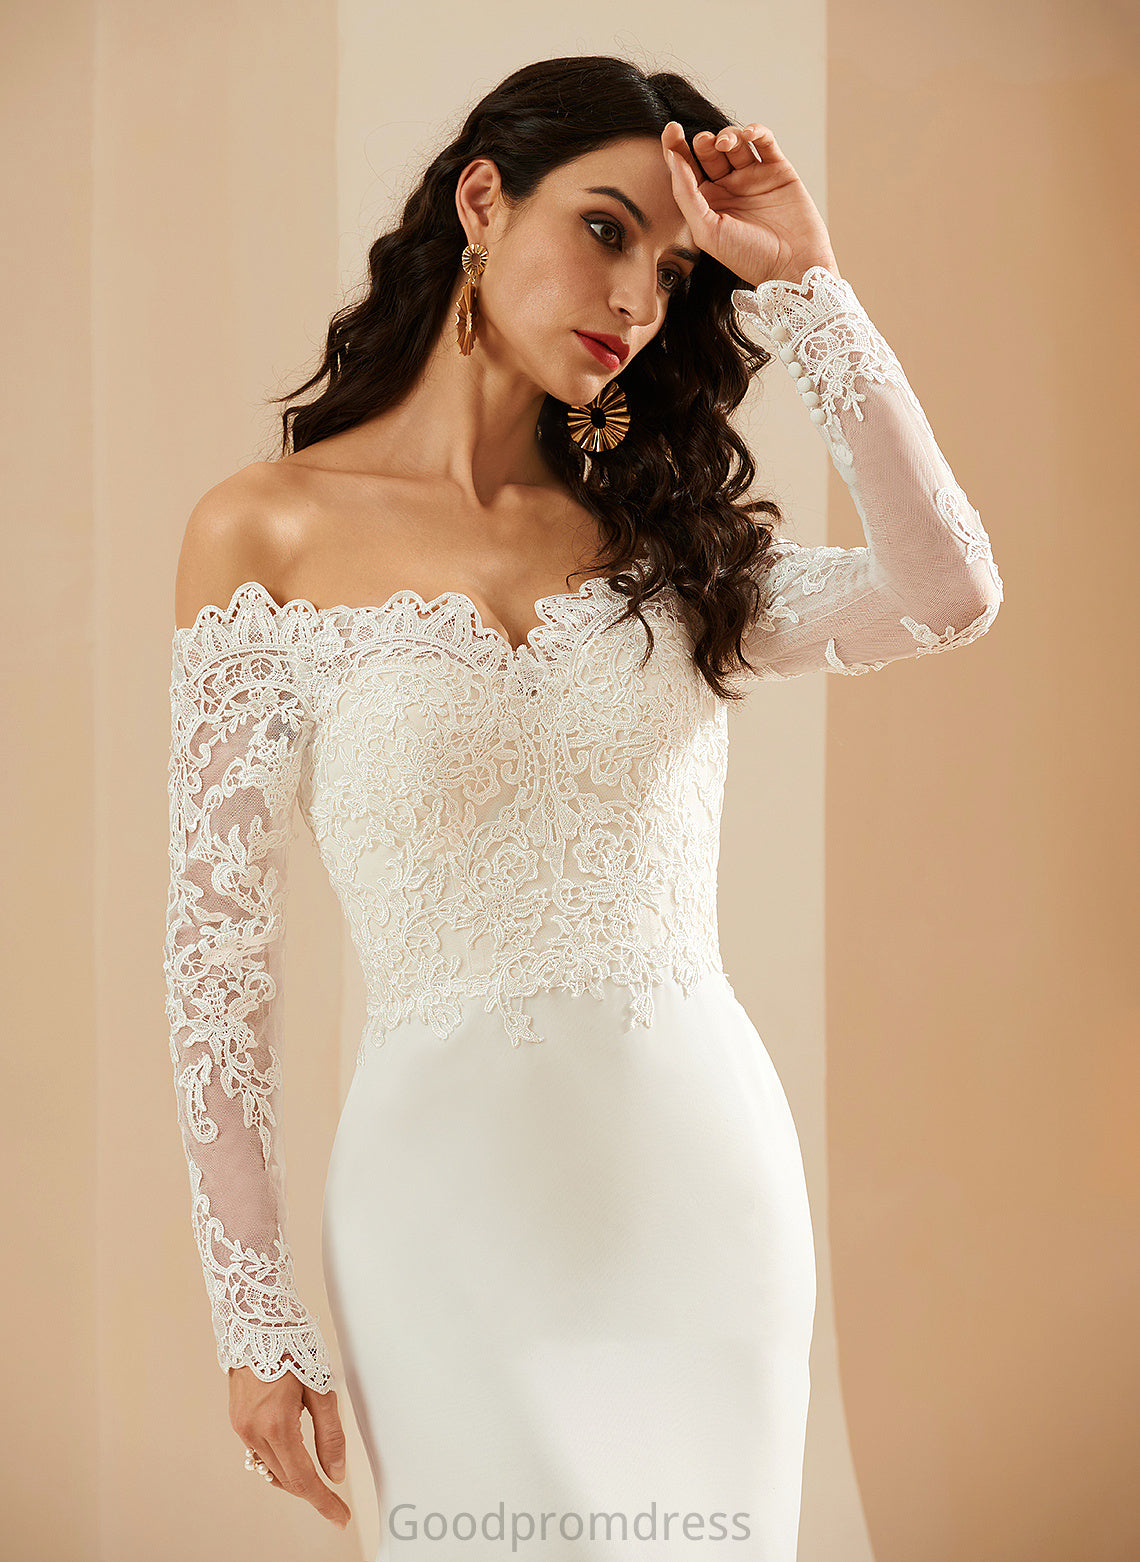 Train Maliyah Wedding Lace Wedding Dresses Court With Off-the-Shoulder Dress Trumpet/Mermaid